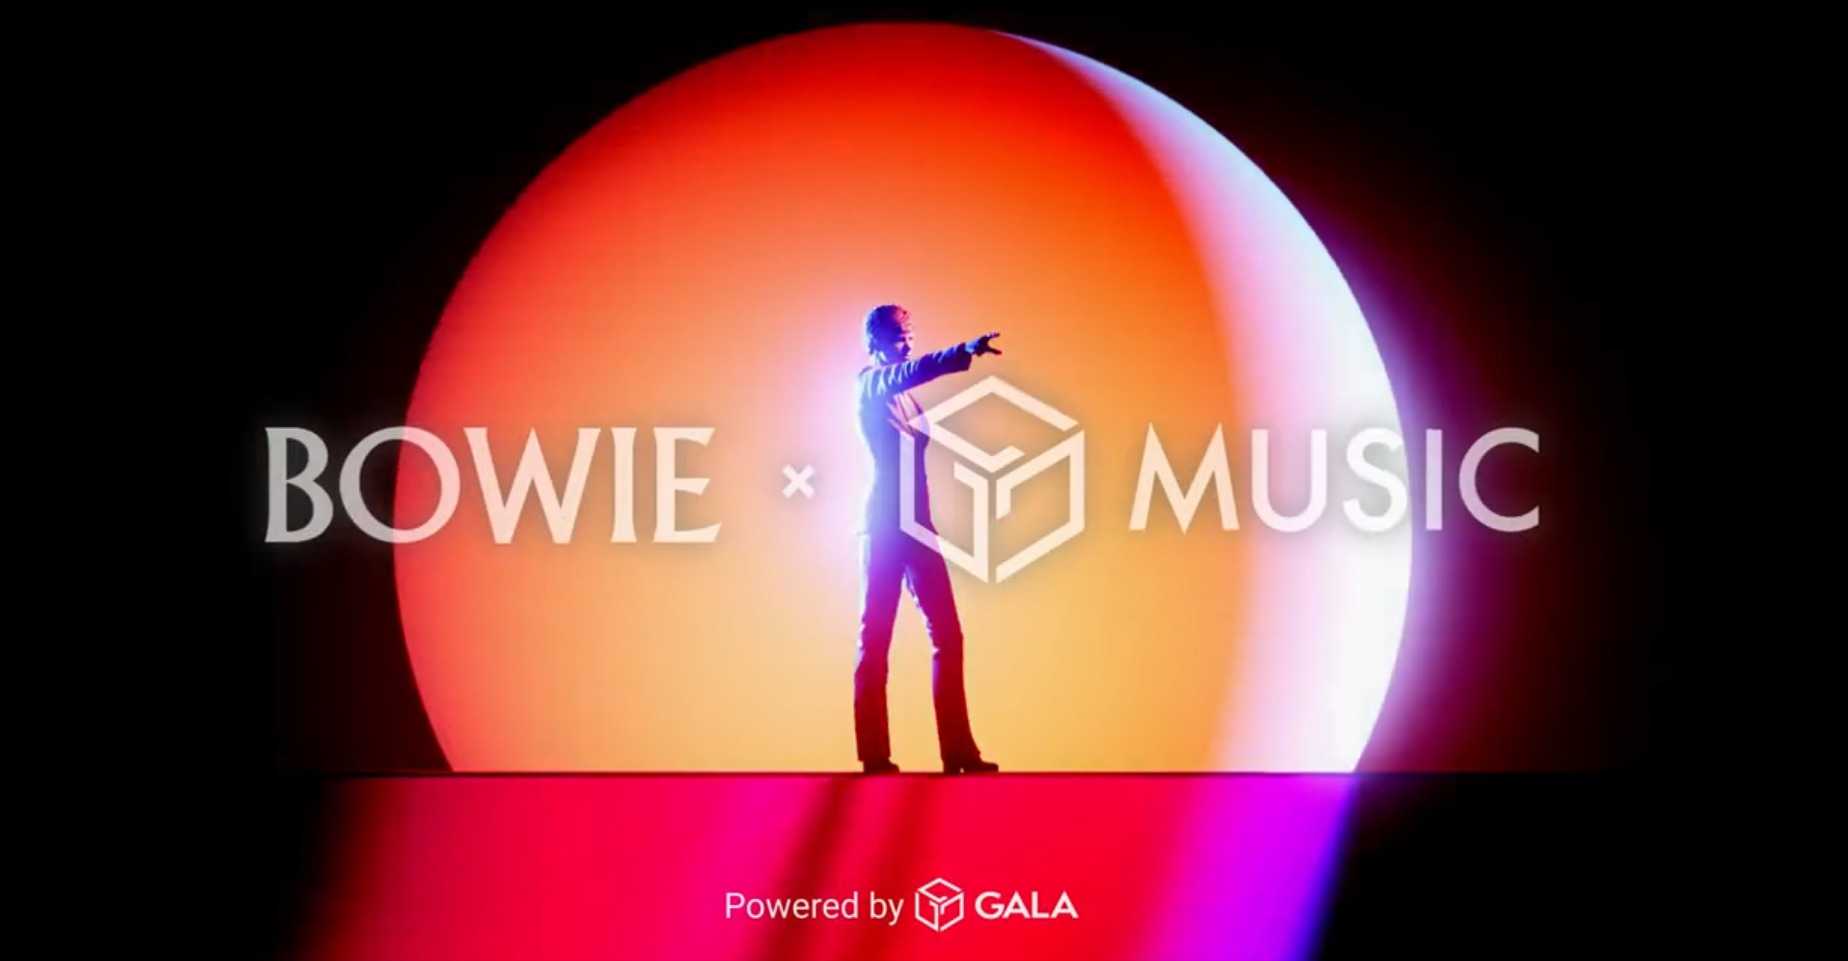 David Bowie Coming to Gala Music